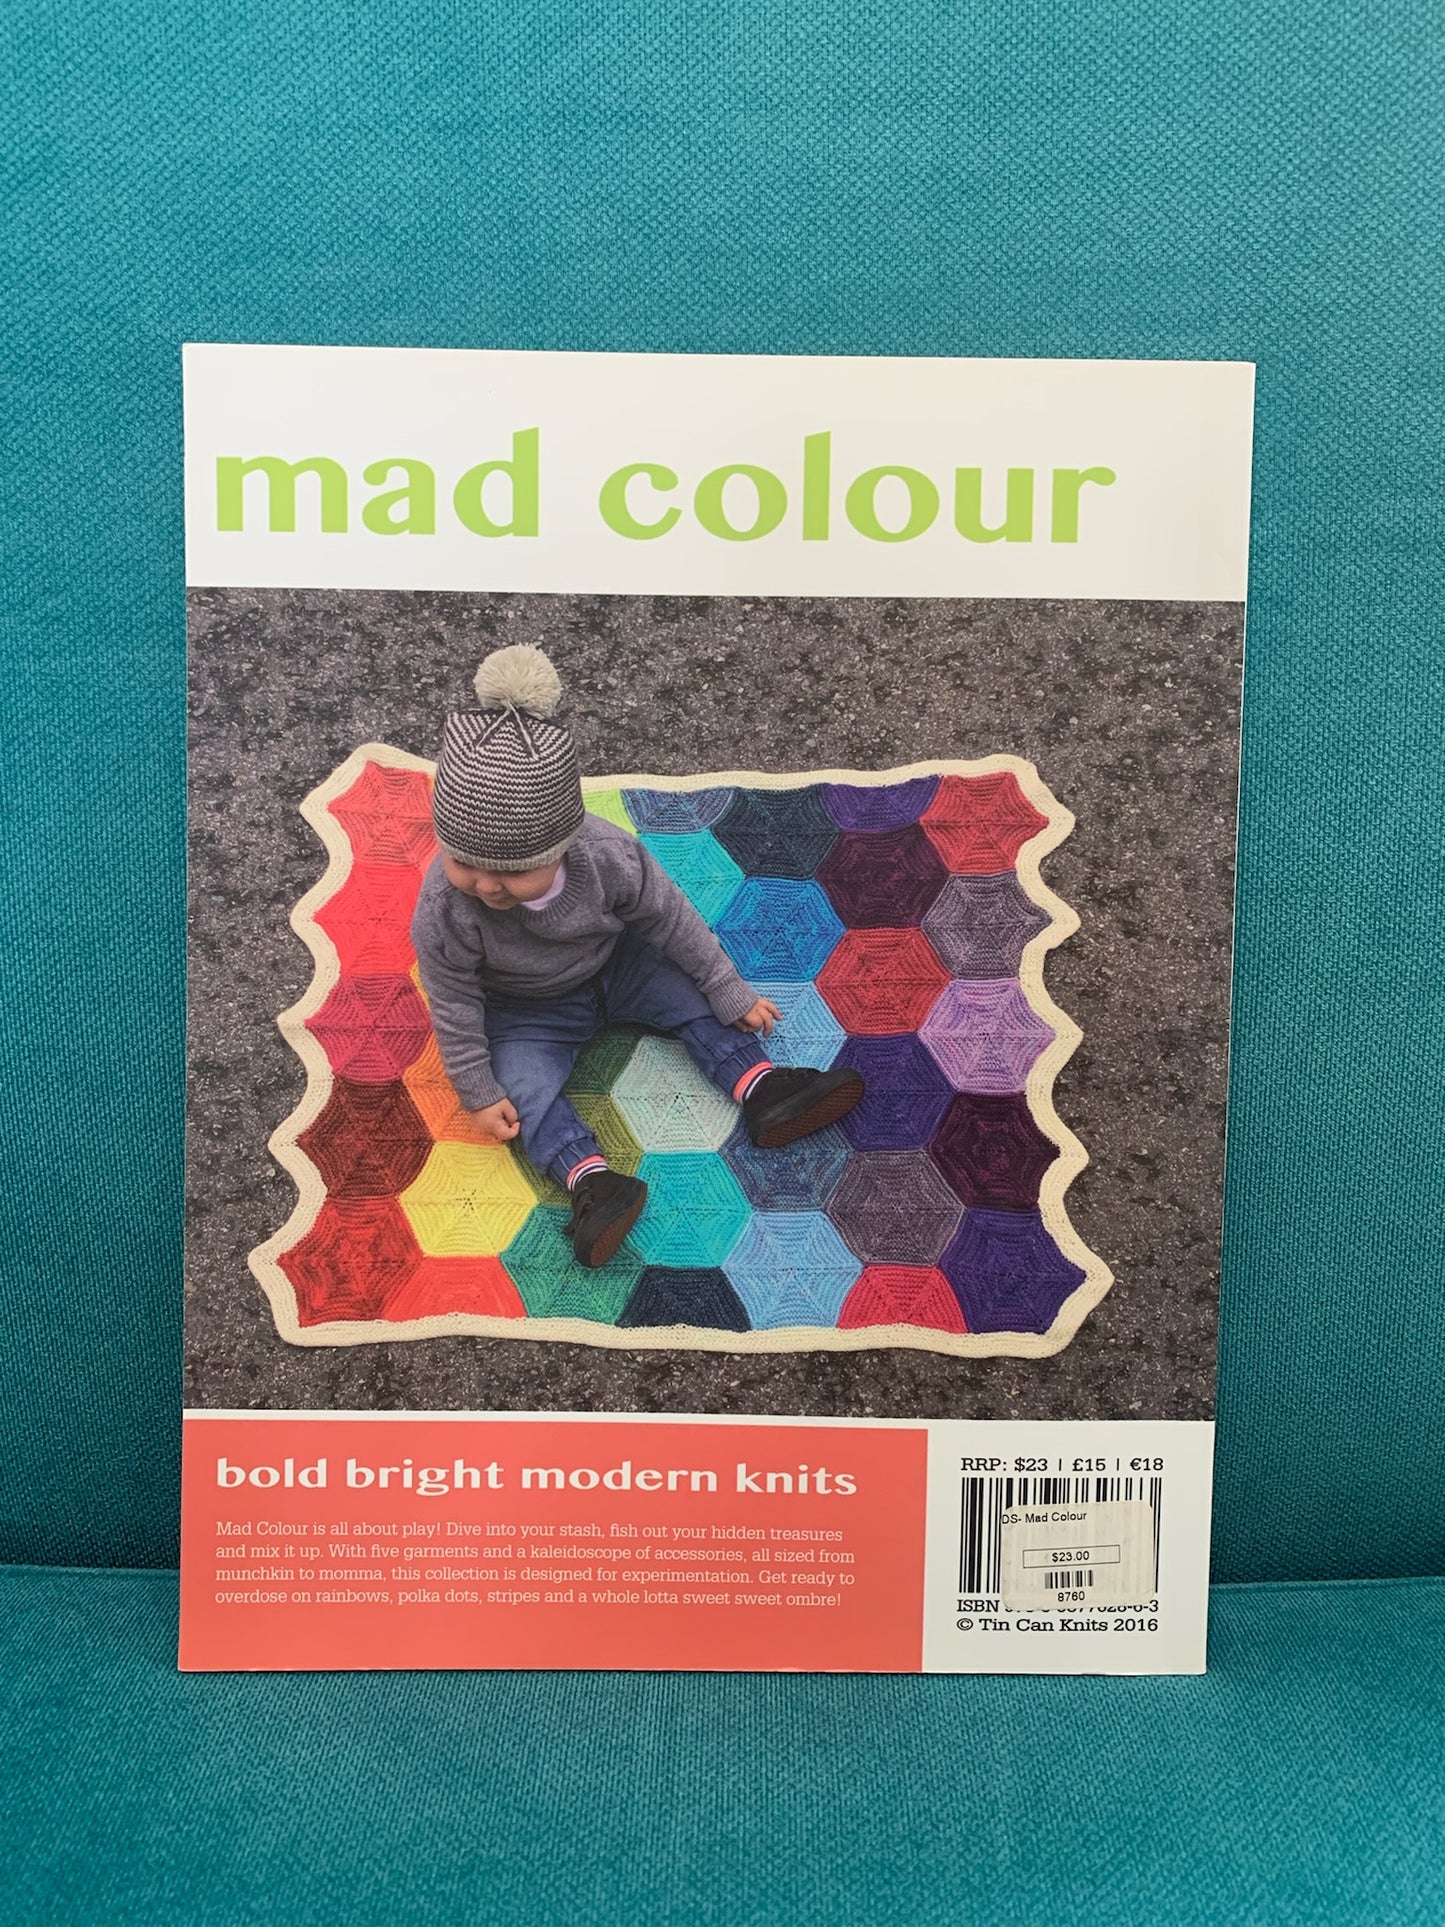 Mad Colour: Bold and Playful Modern Knits - Alexa Ludeman and Emily Wessel